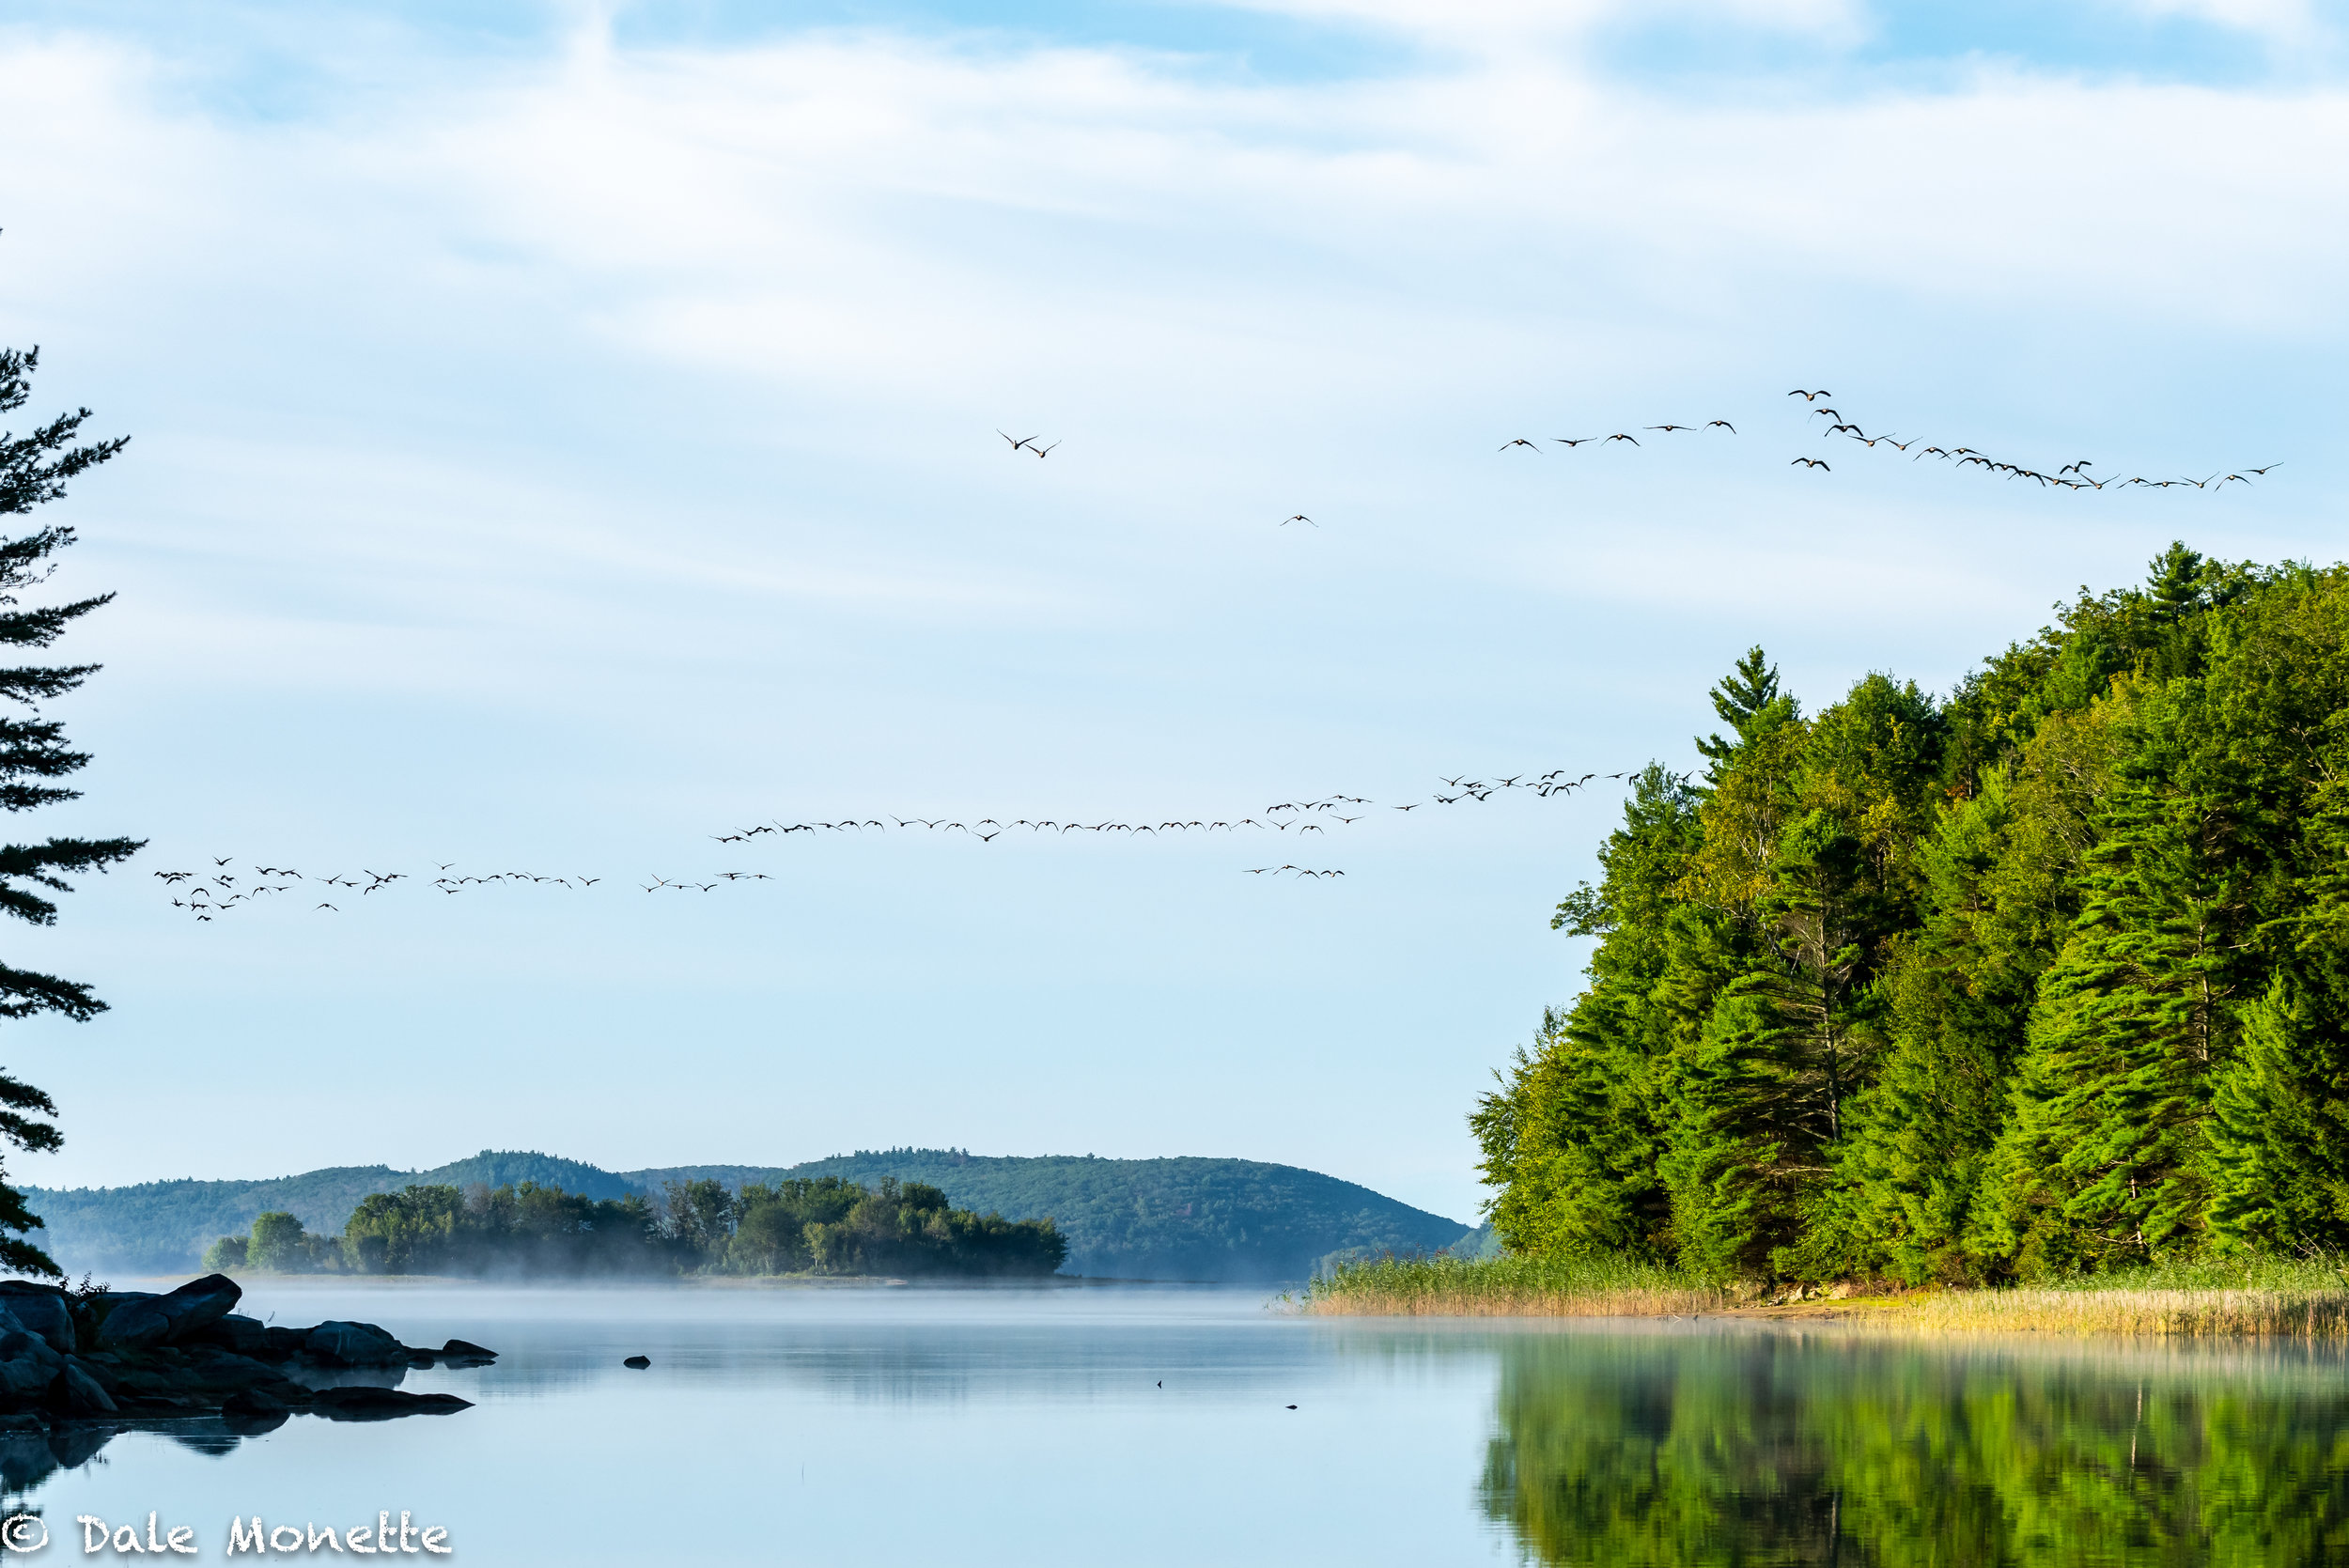   The Quabbin Canada geese are getting restless……  